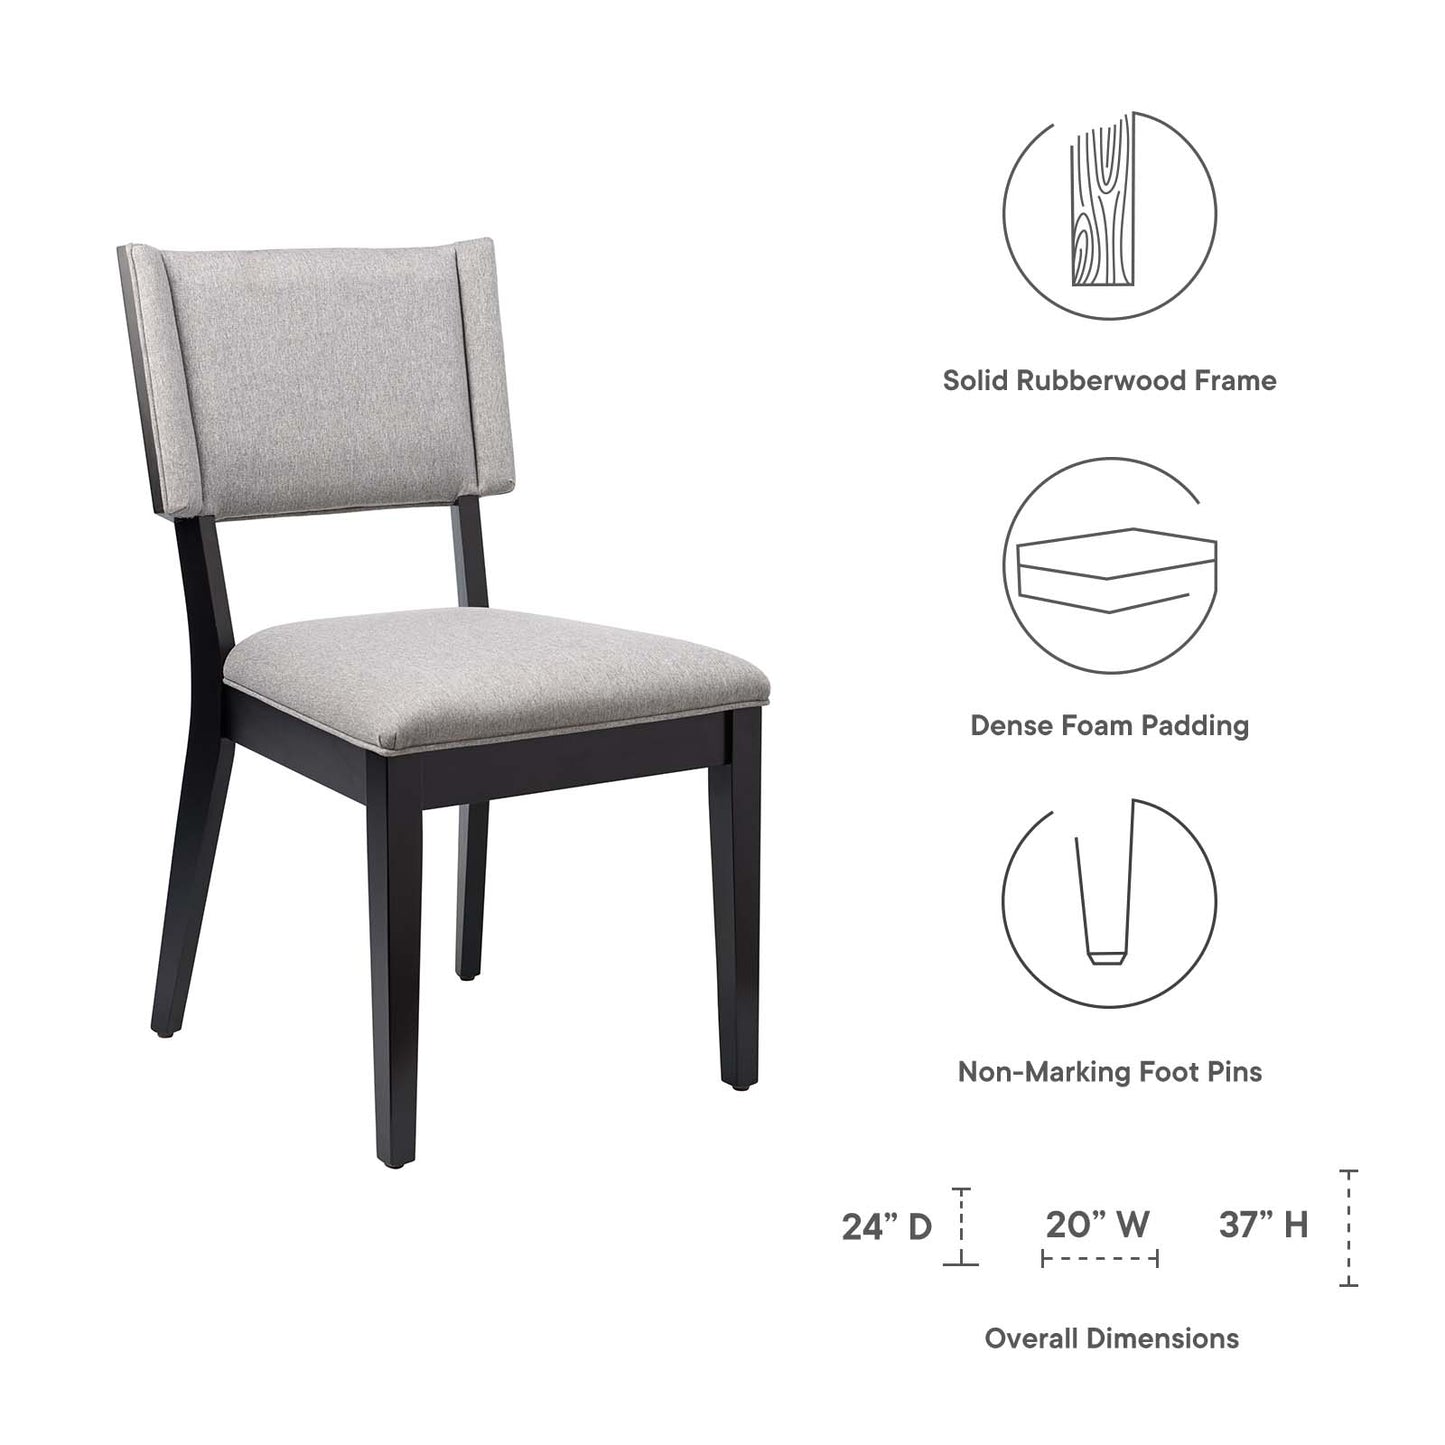 Esquire Dining Chairs - Set of 2 Light Gray EEI-4559-LGR